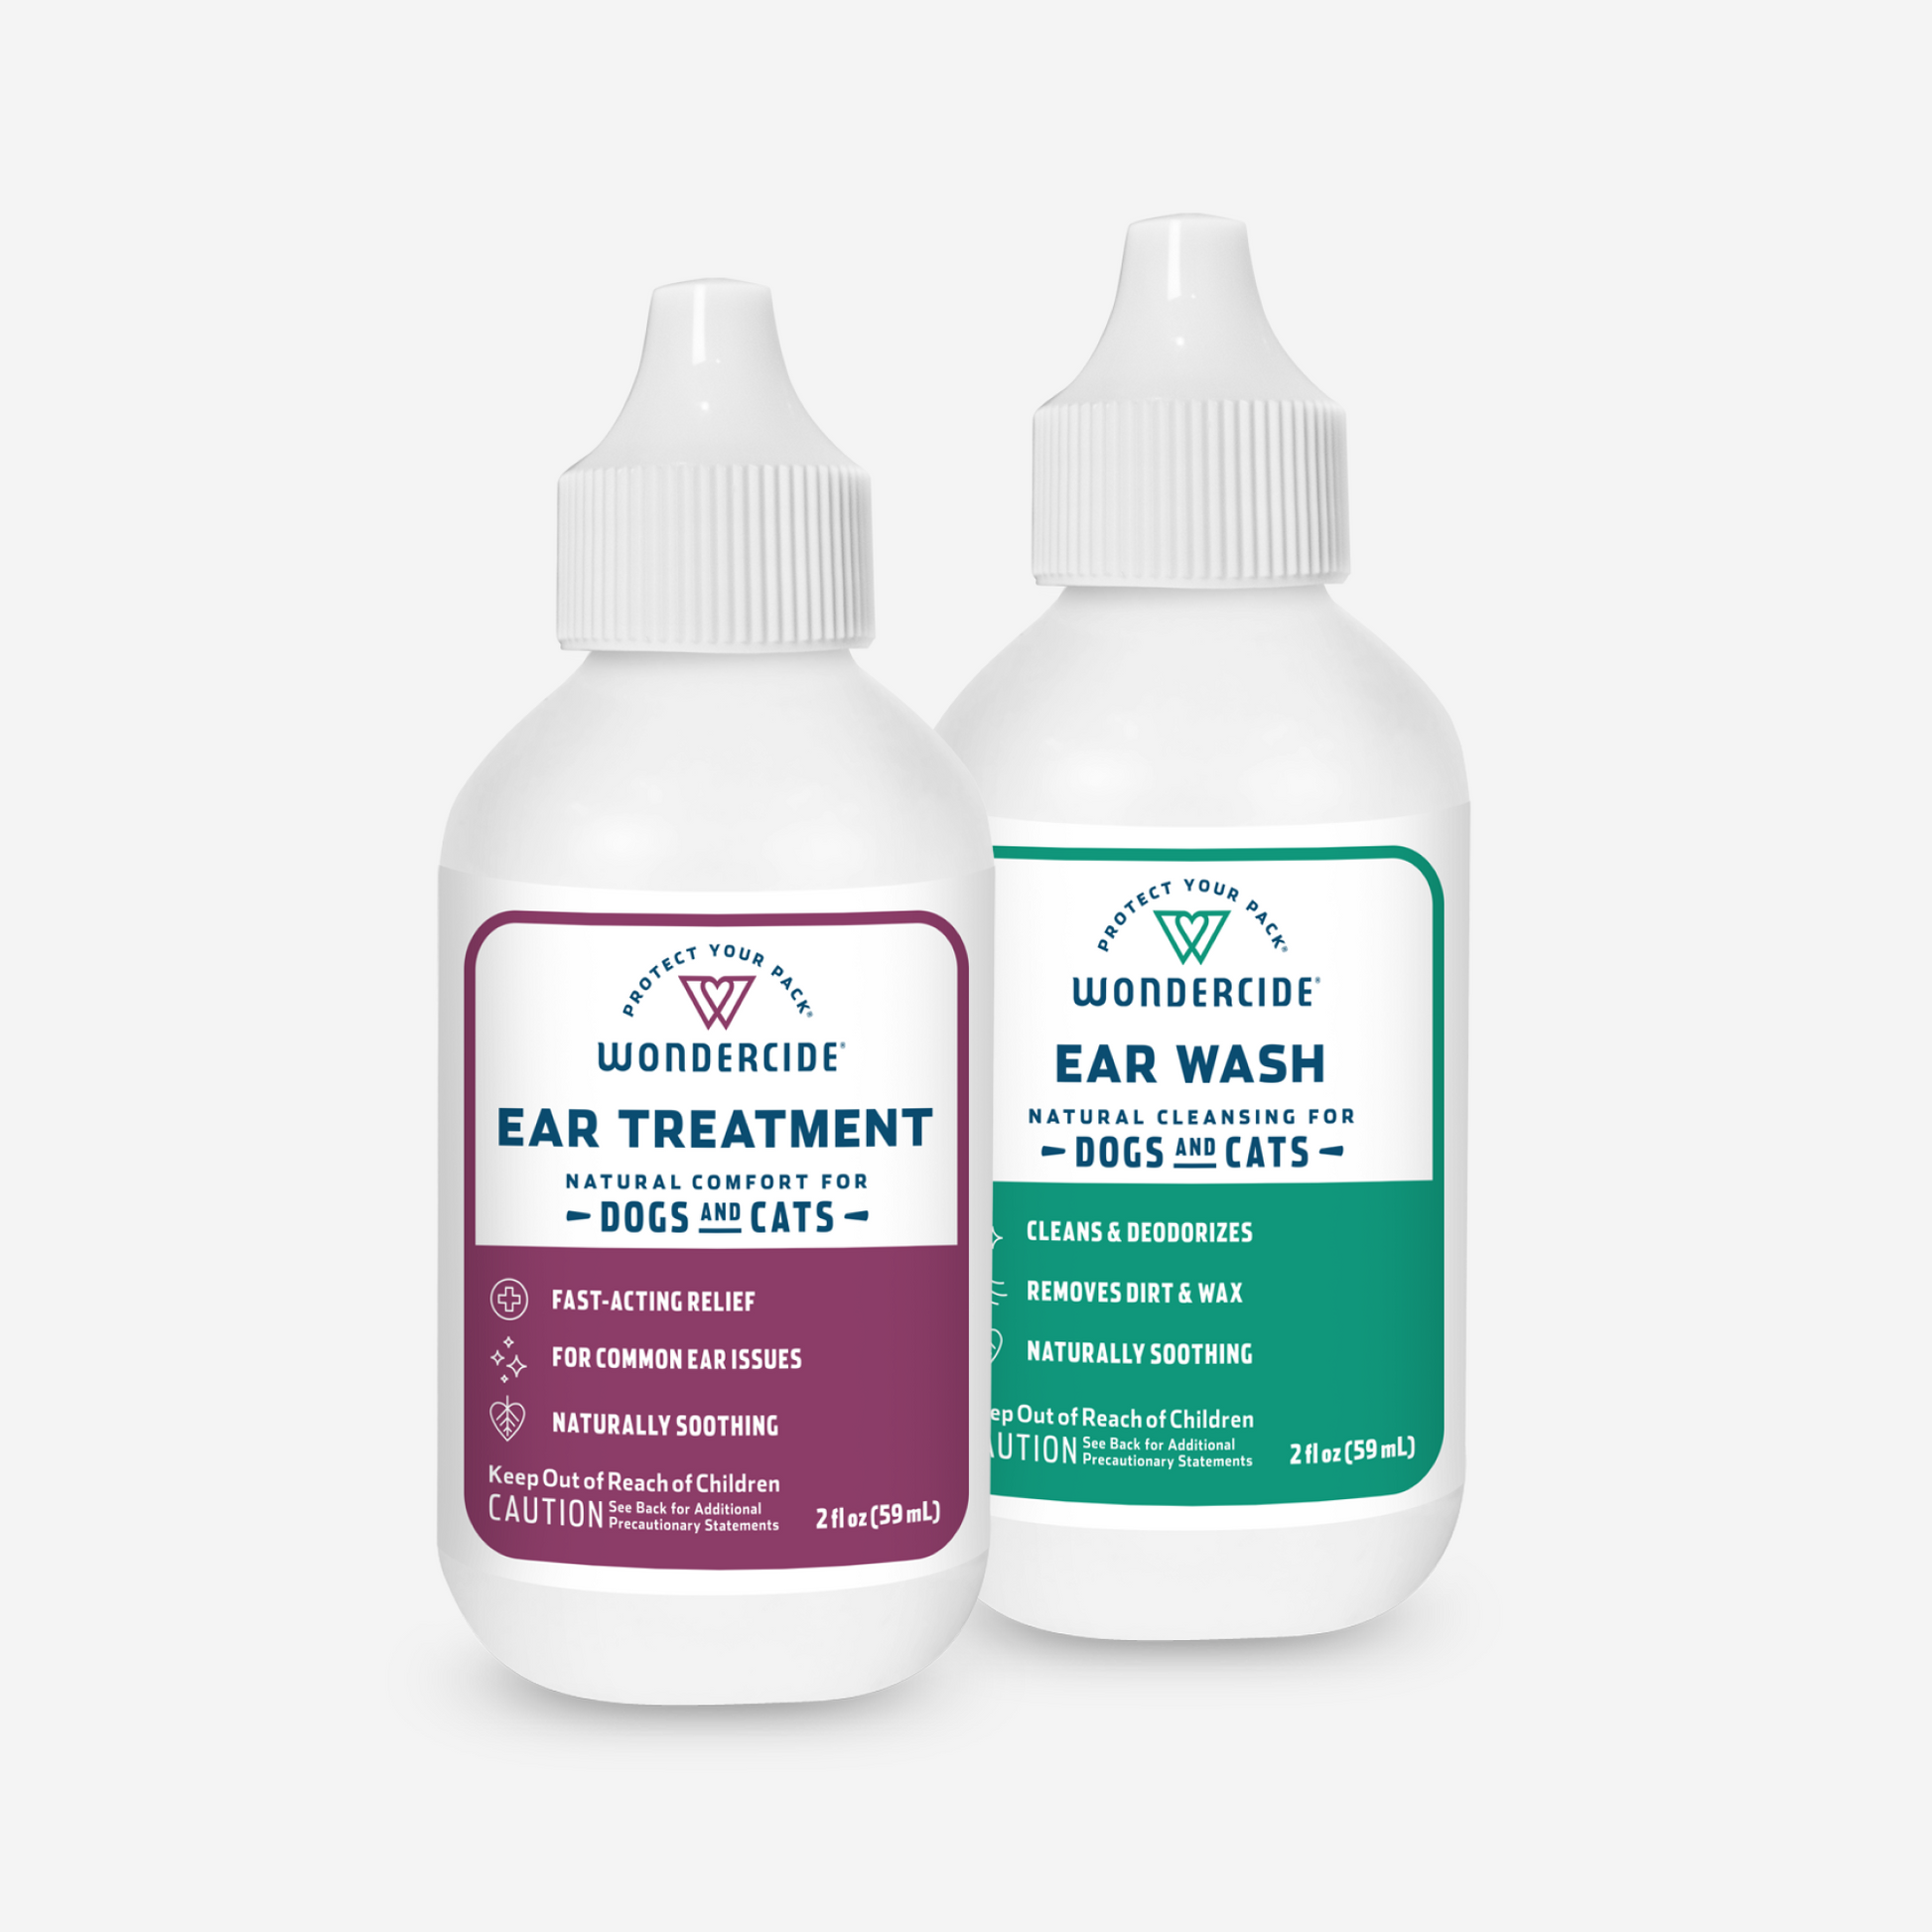 Ear Care for Dogs and Cats